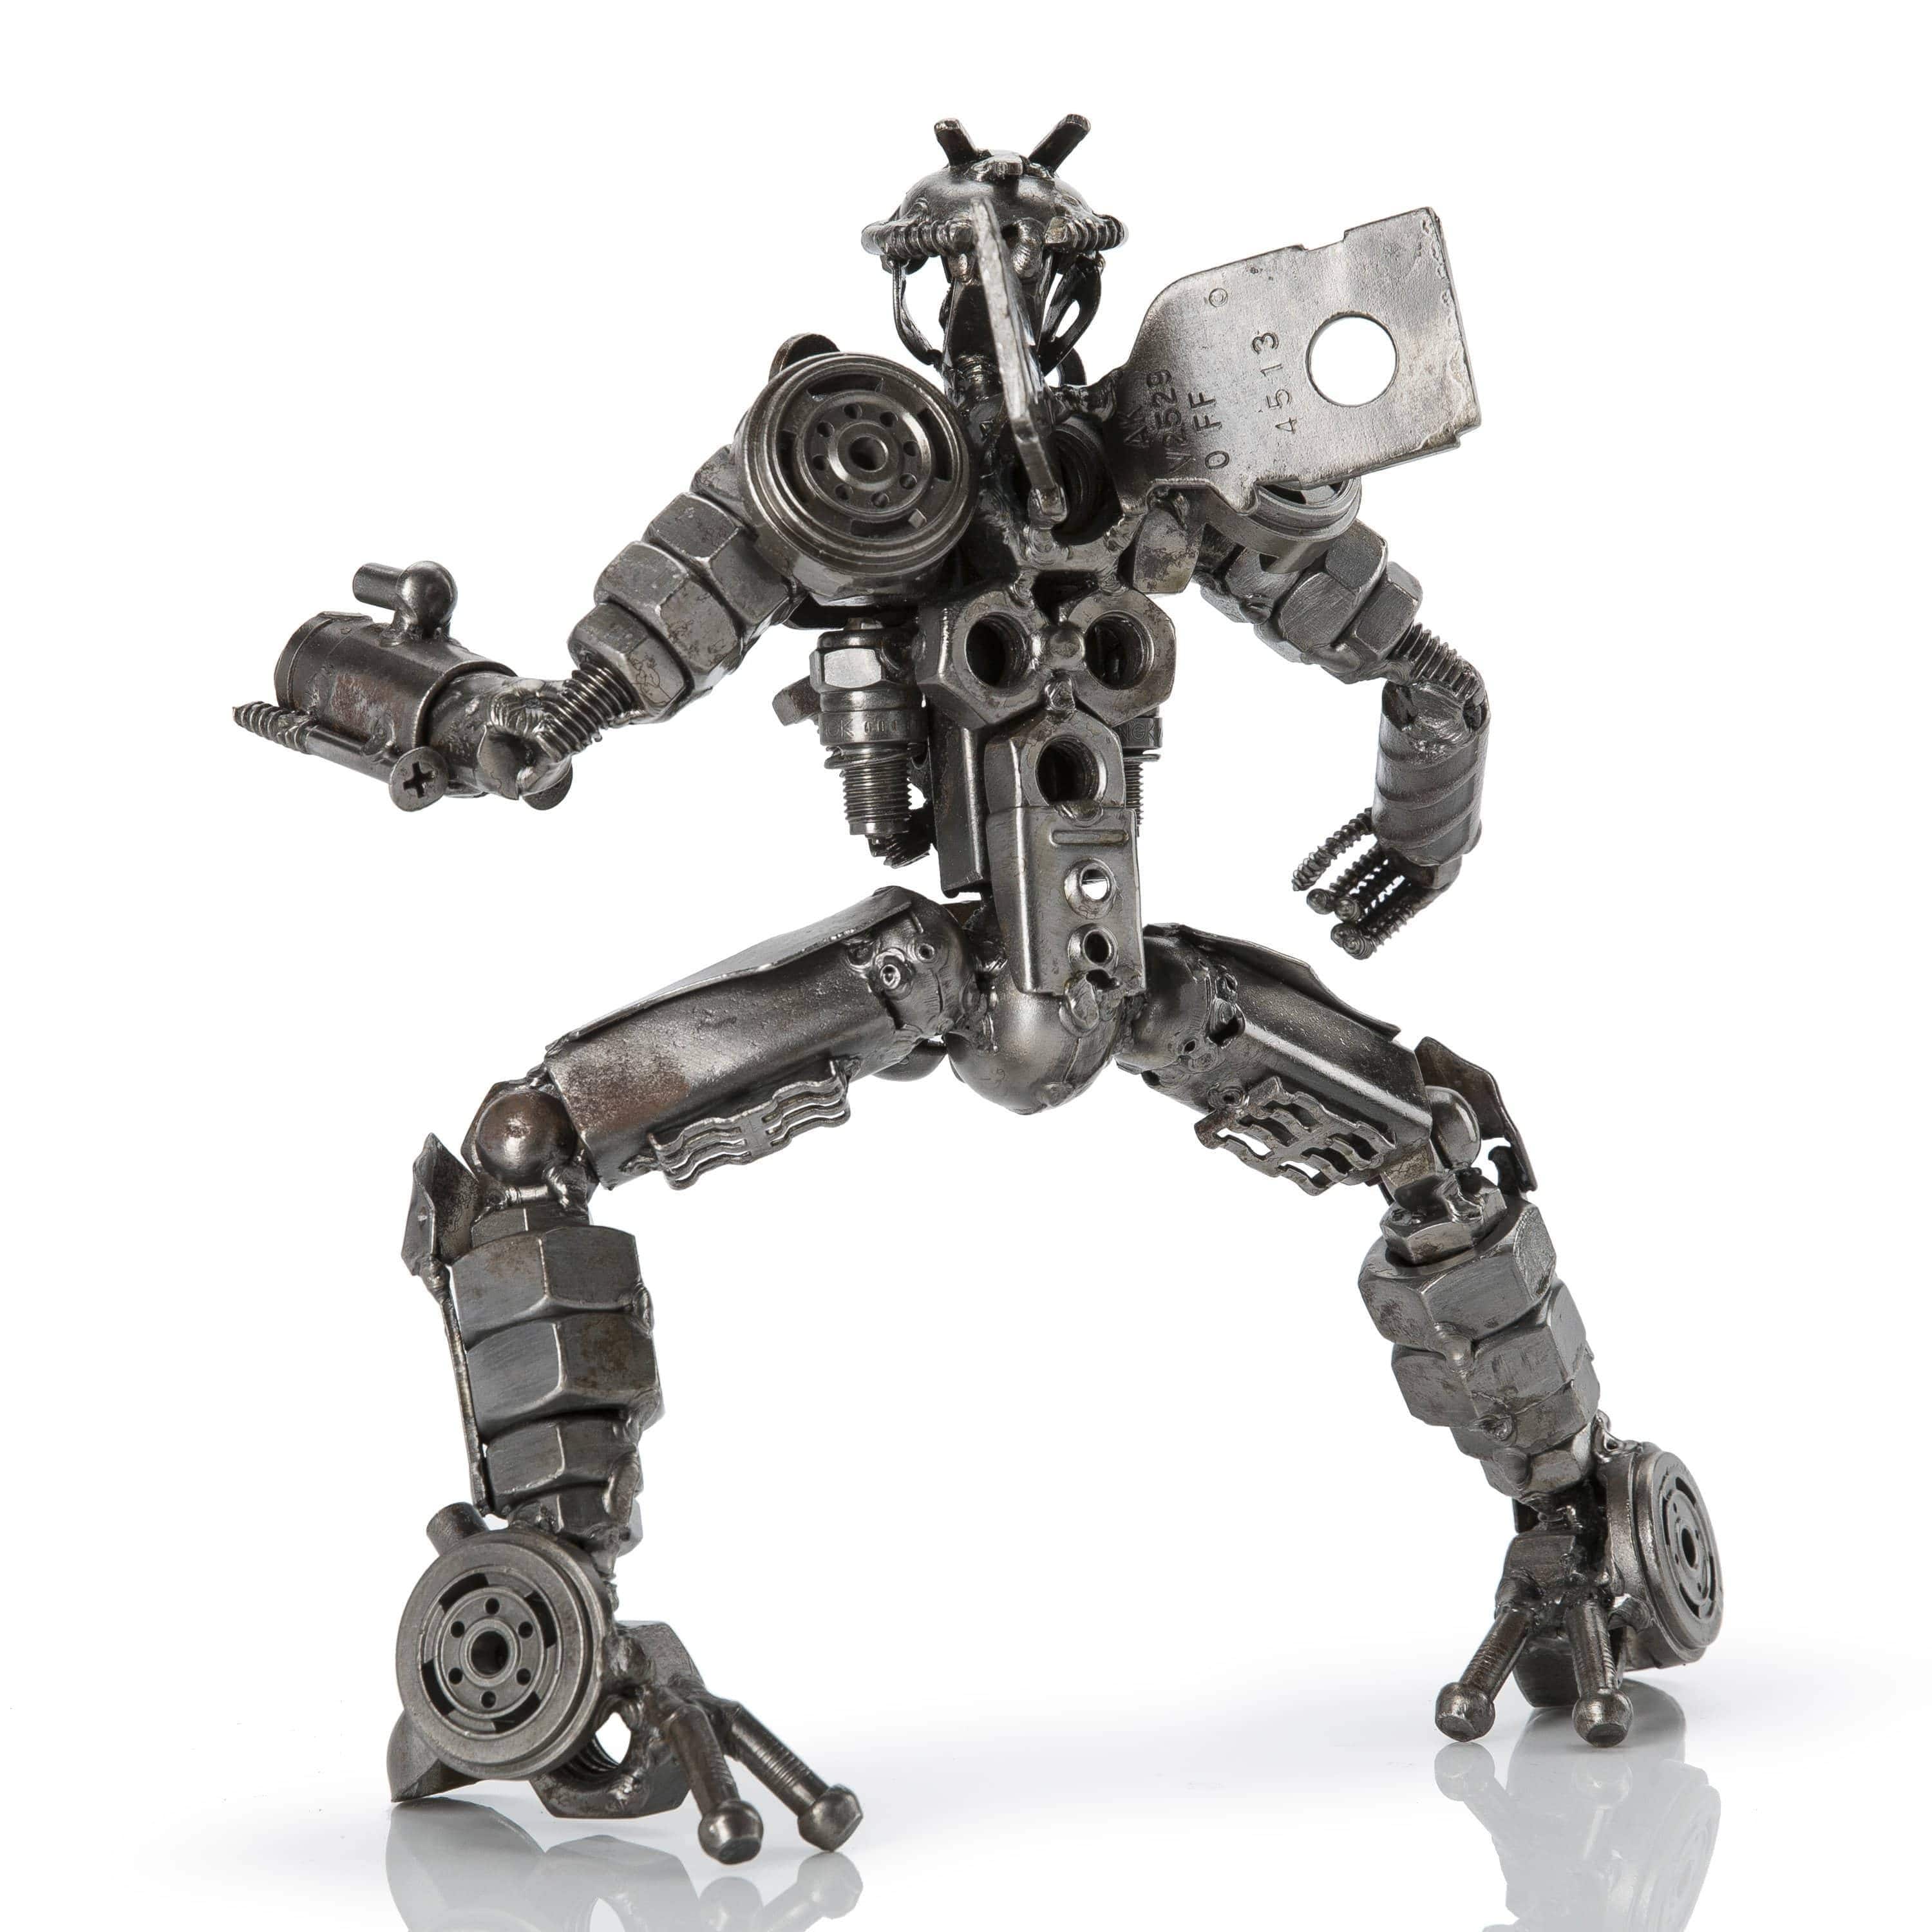 Kalifano Recycled Metal Art BumbleBee with Blaster Inspired Recycled Metal Sculpture RMS-700BBB-N